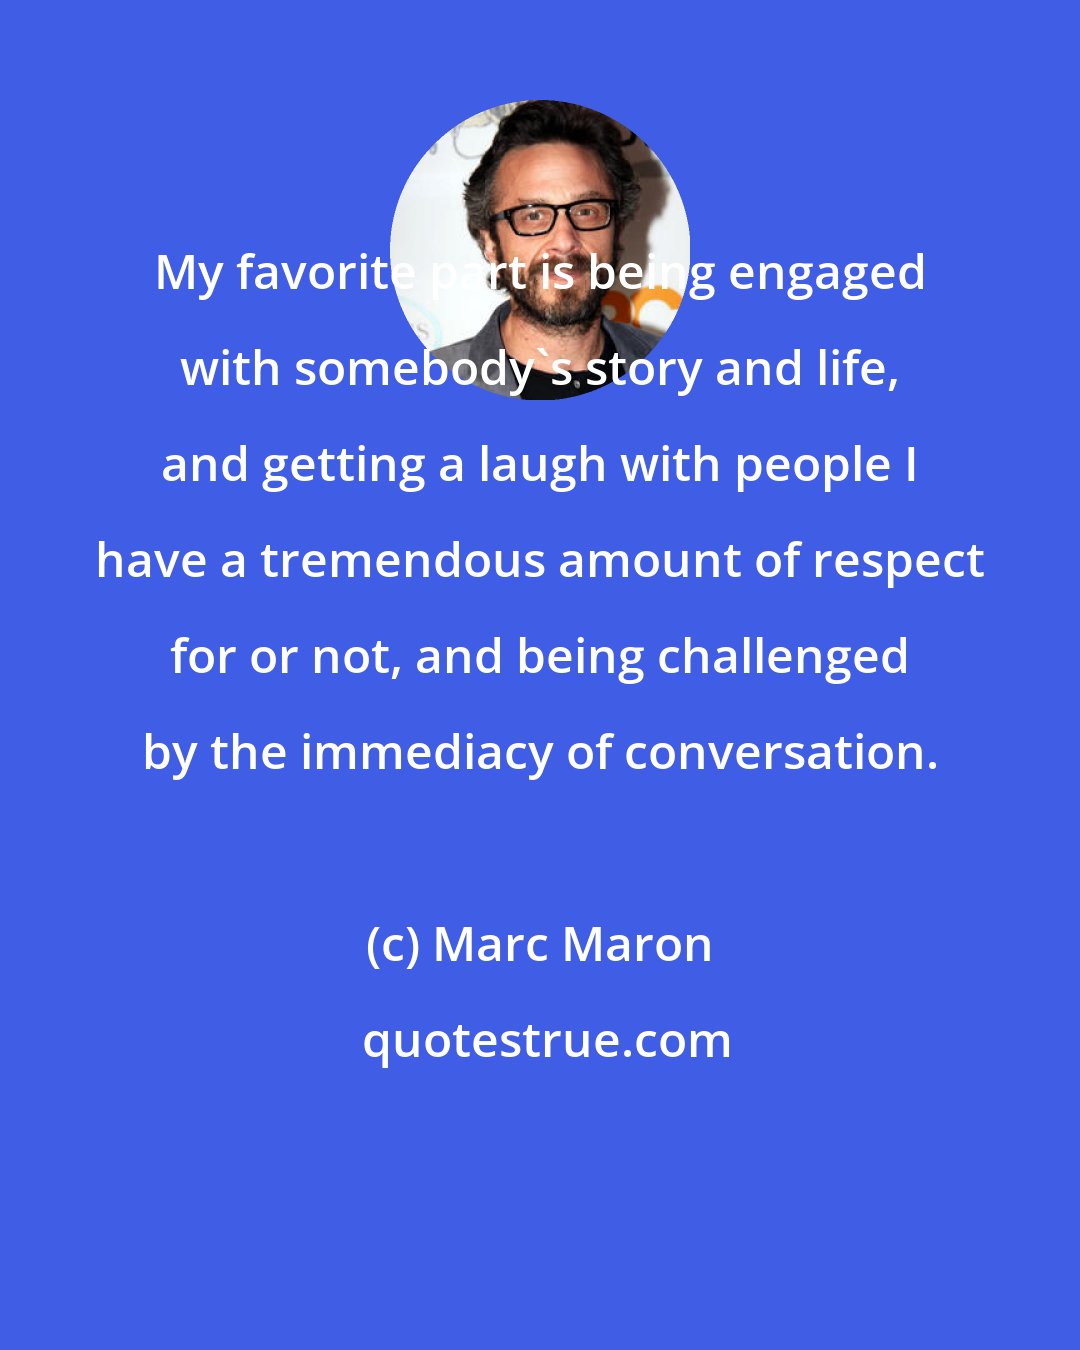 Marc Maron: My favorite part is being engaged with somebody's story and life, and getting a laugh with people I have a tremendous amount of respect for or not, and being challenged by the immediacy of conversation.